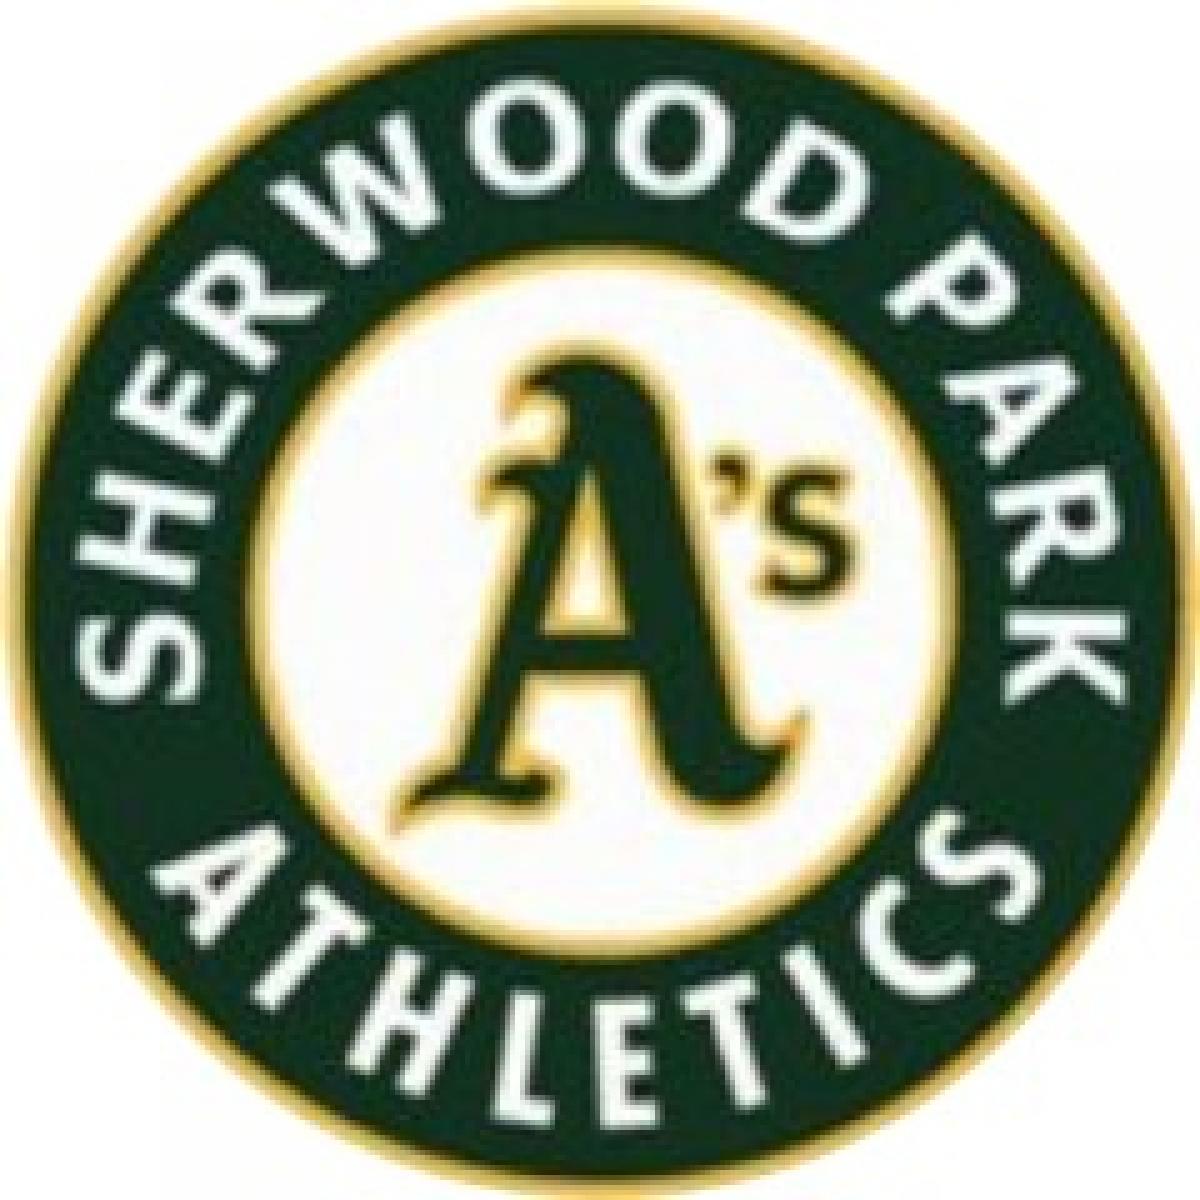 Sherwood Park Ceases Operations